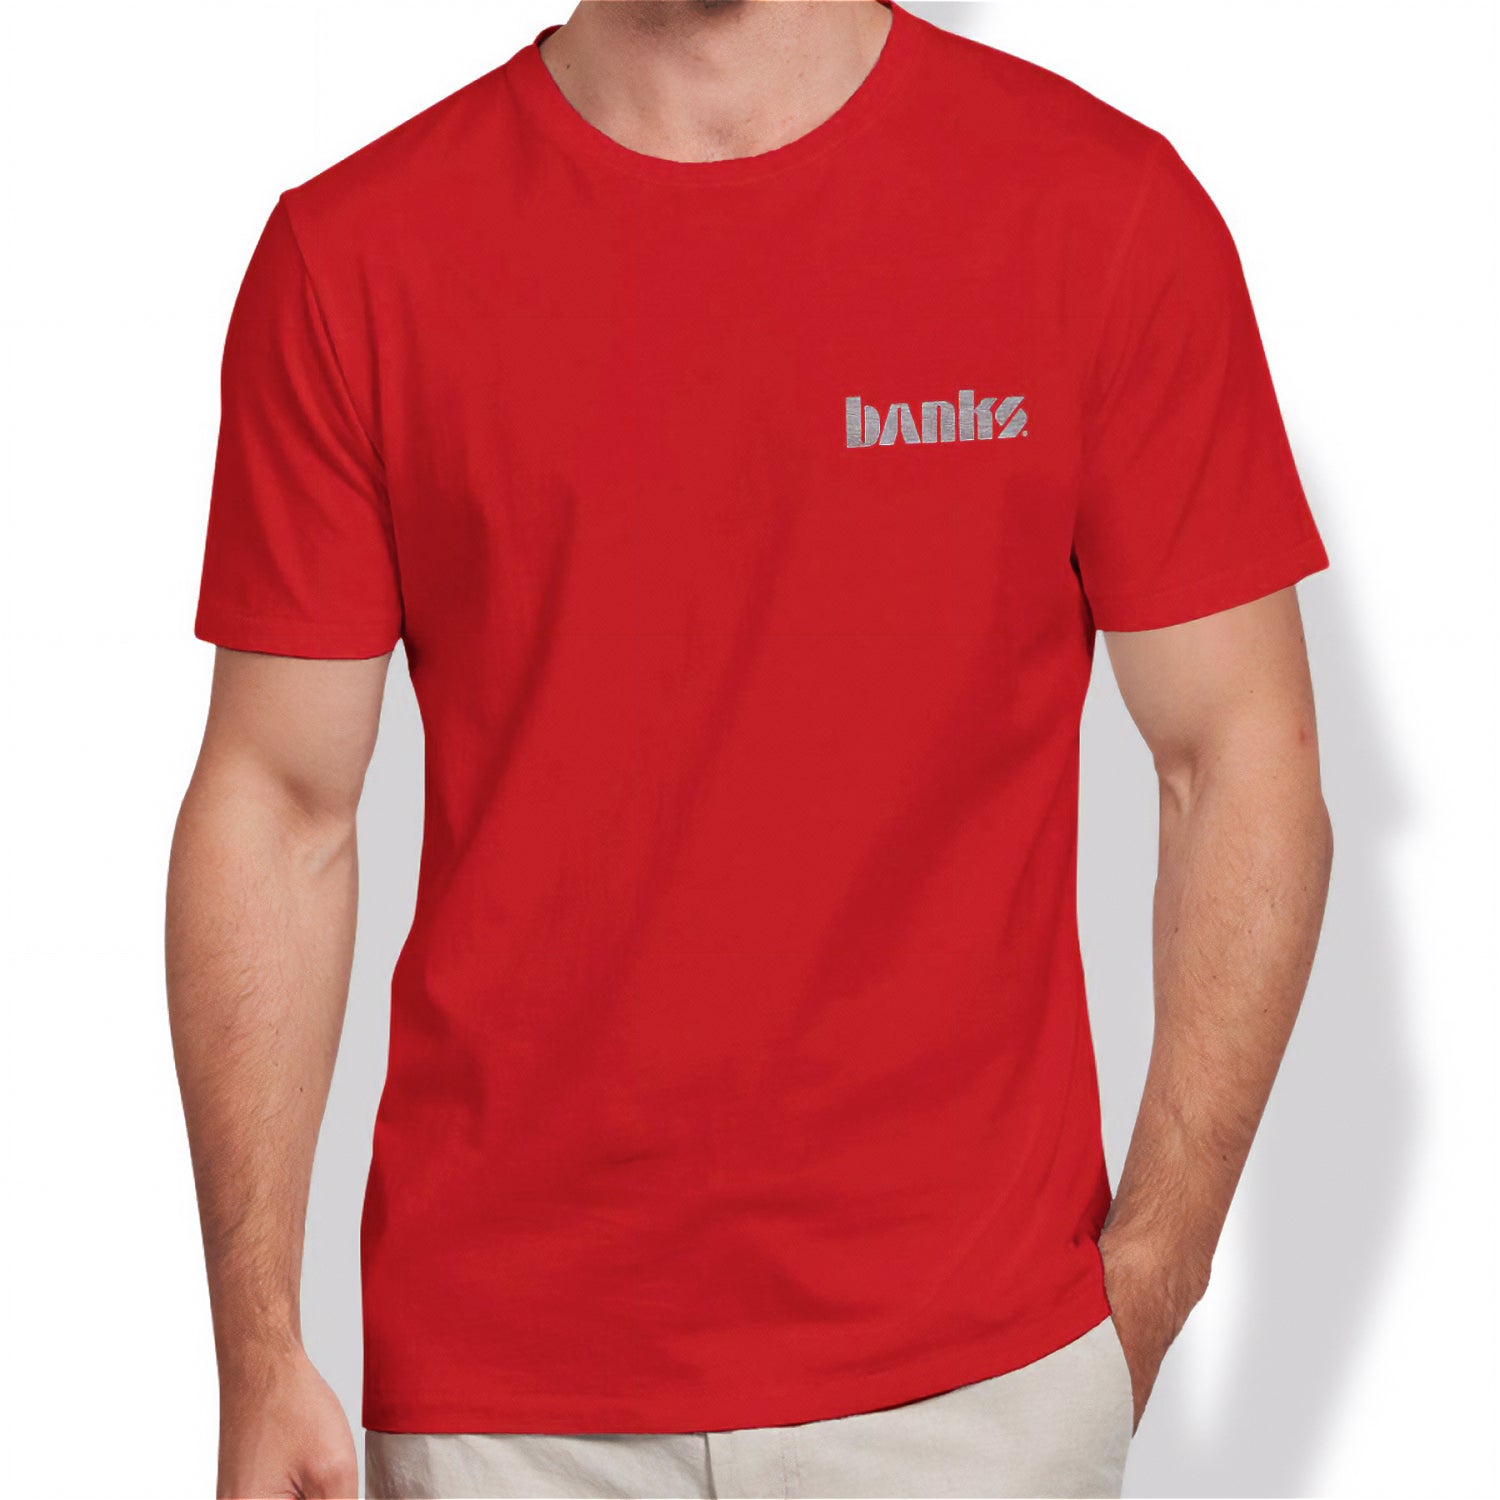 Banks One T Shirt Front Logo 96283